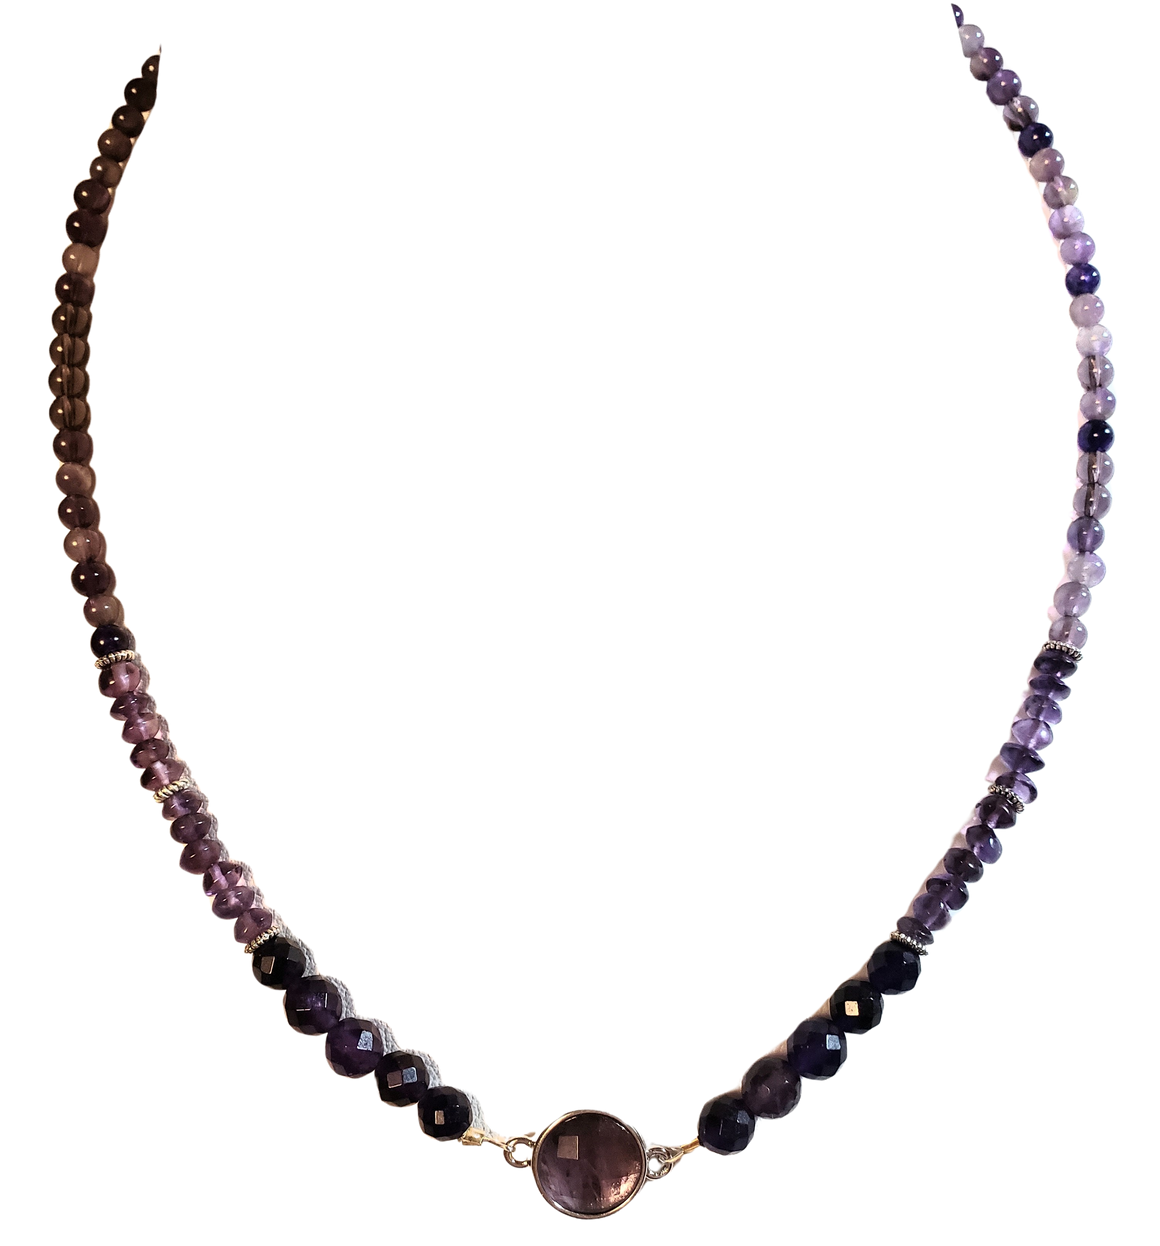 Amethyst Round Focal Bead Necklace